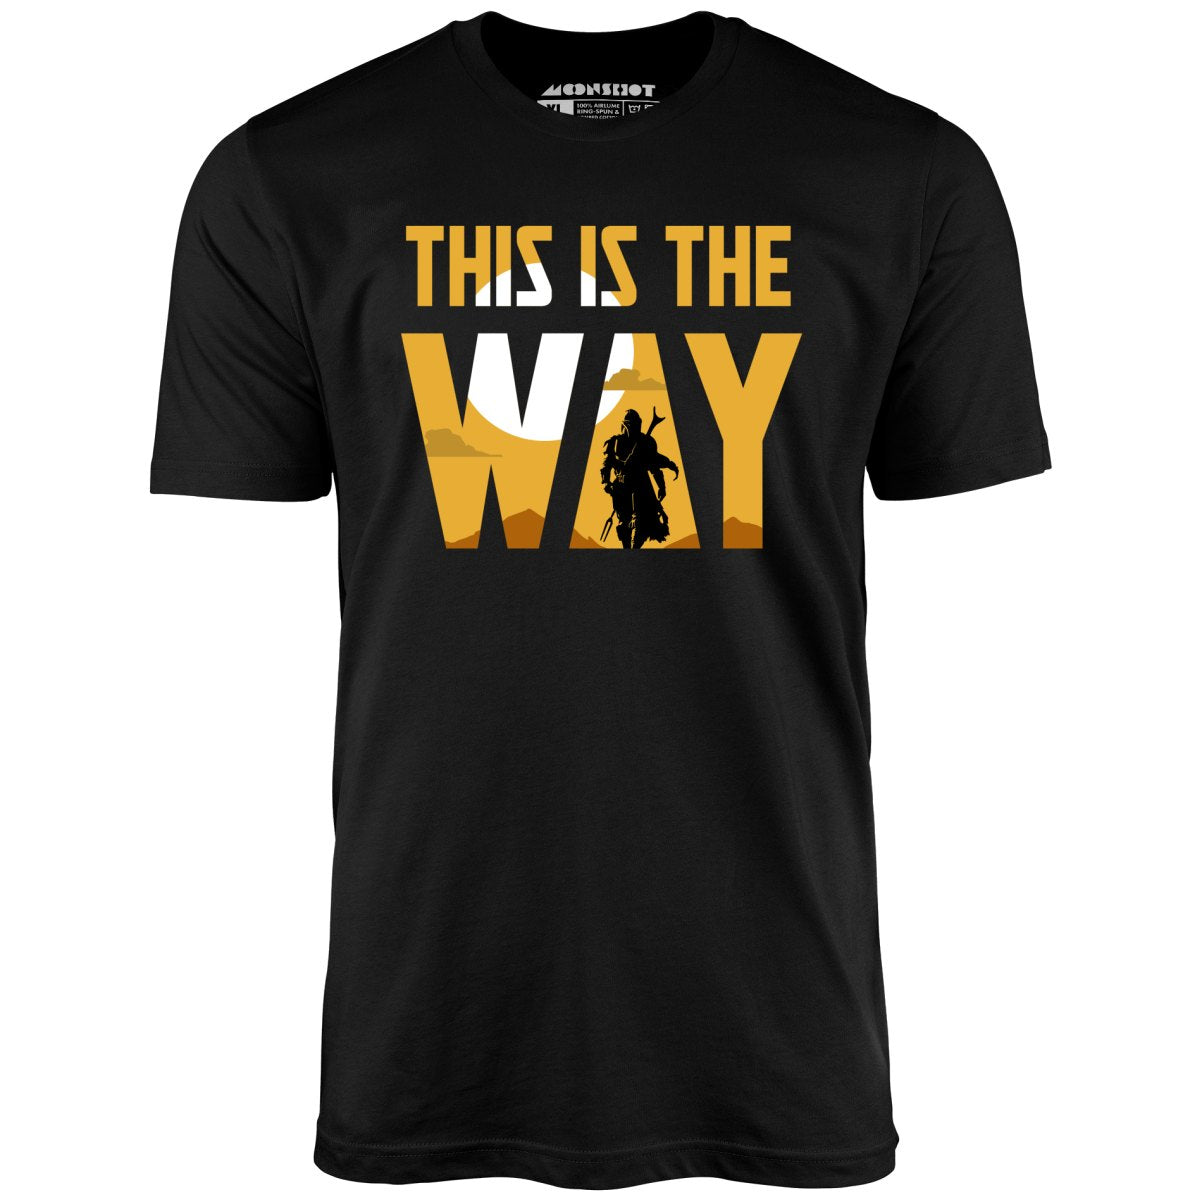 This is The Way - Unisex T-Shirt